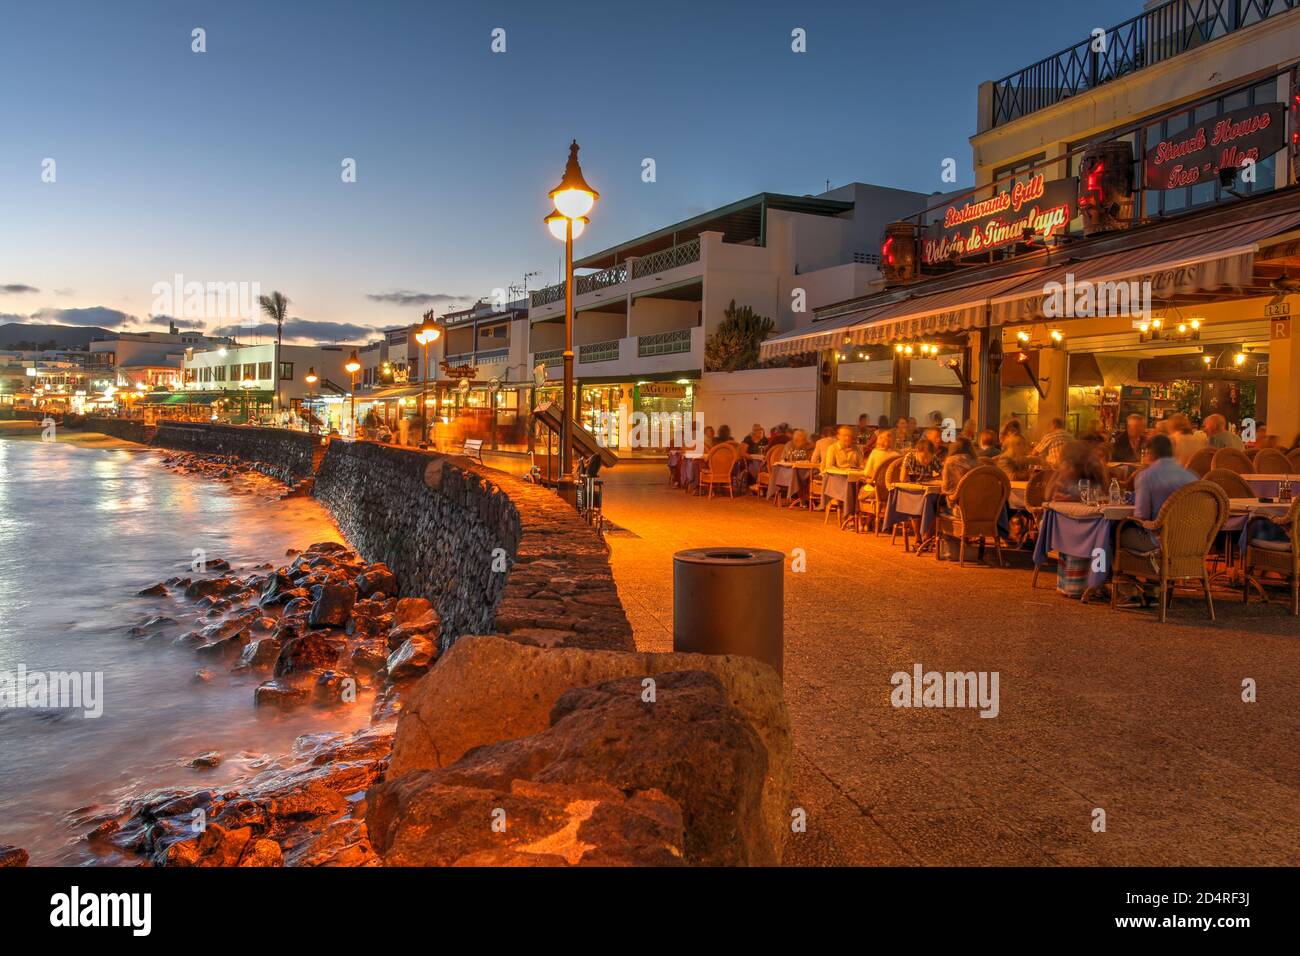 Lanzarote, Spain - April 23, 2014 - Sunset scene by the waterfront of Playa Blanca resort, on Lanzarote, Canary Islands, Spain. Stock Photo